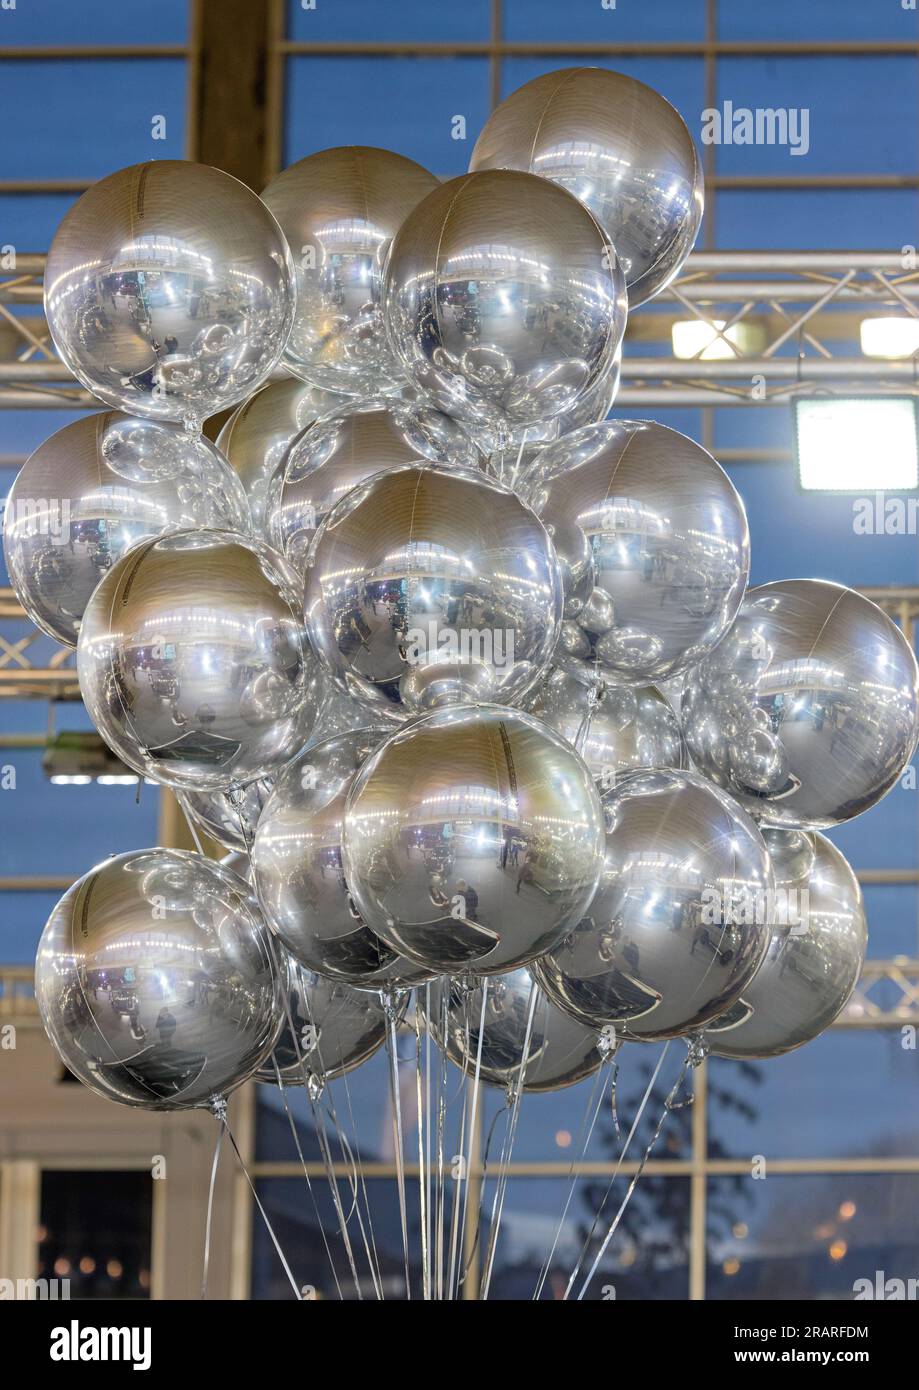 Cluster of Helium Filled Foil Silver Balloons in Hall Stock Photo